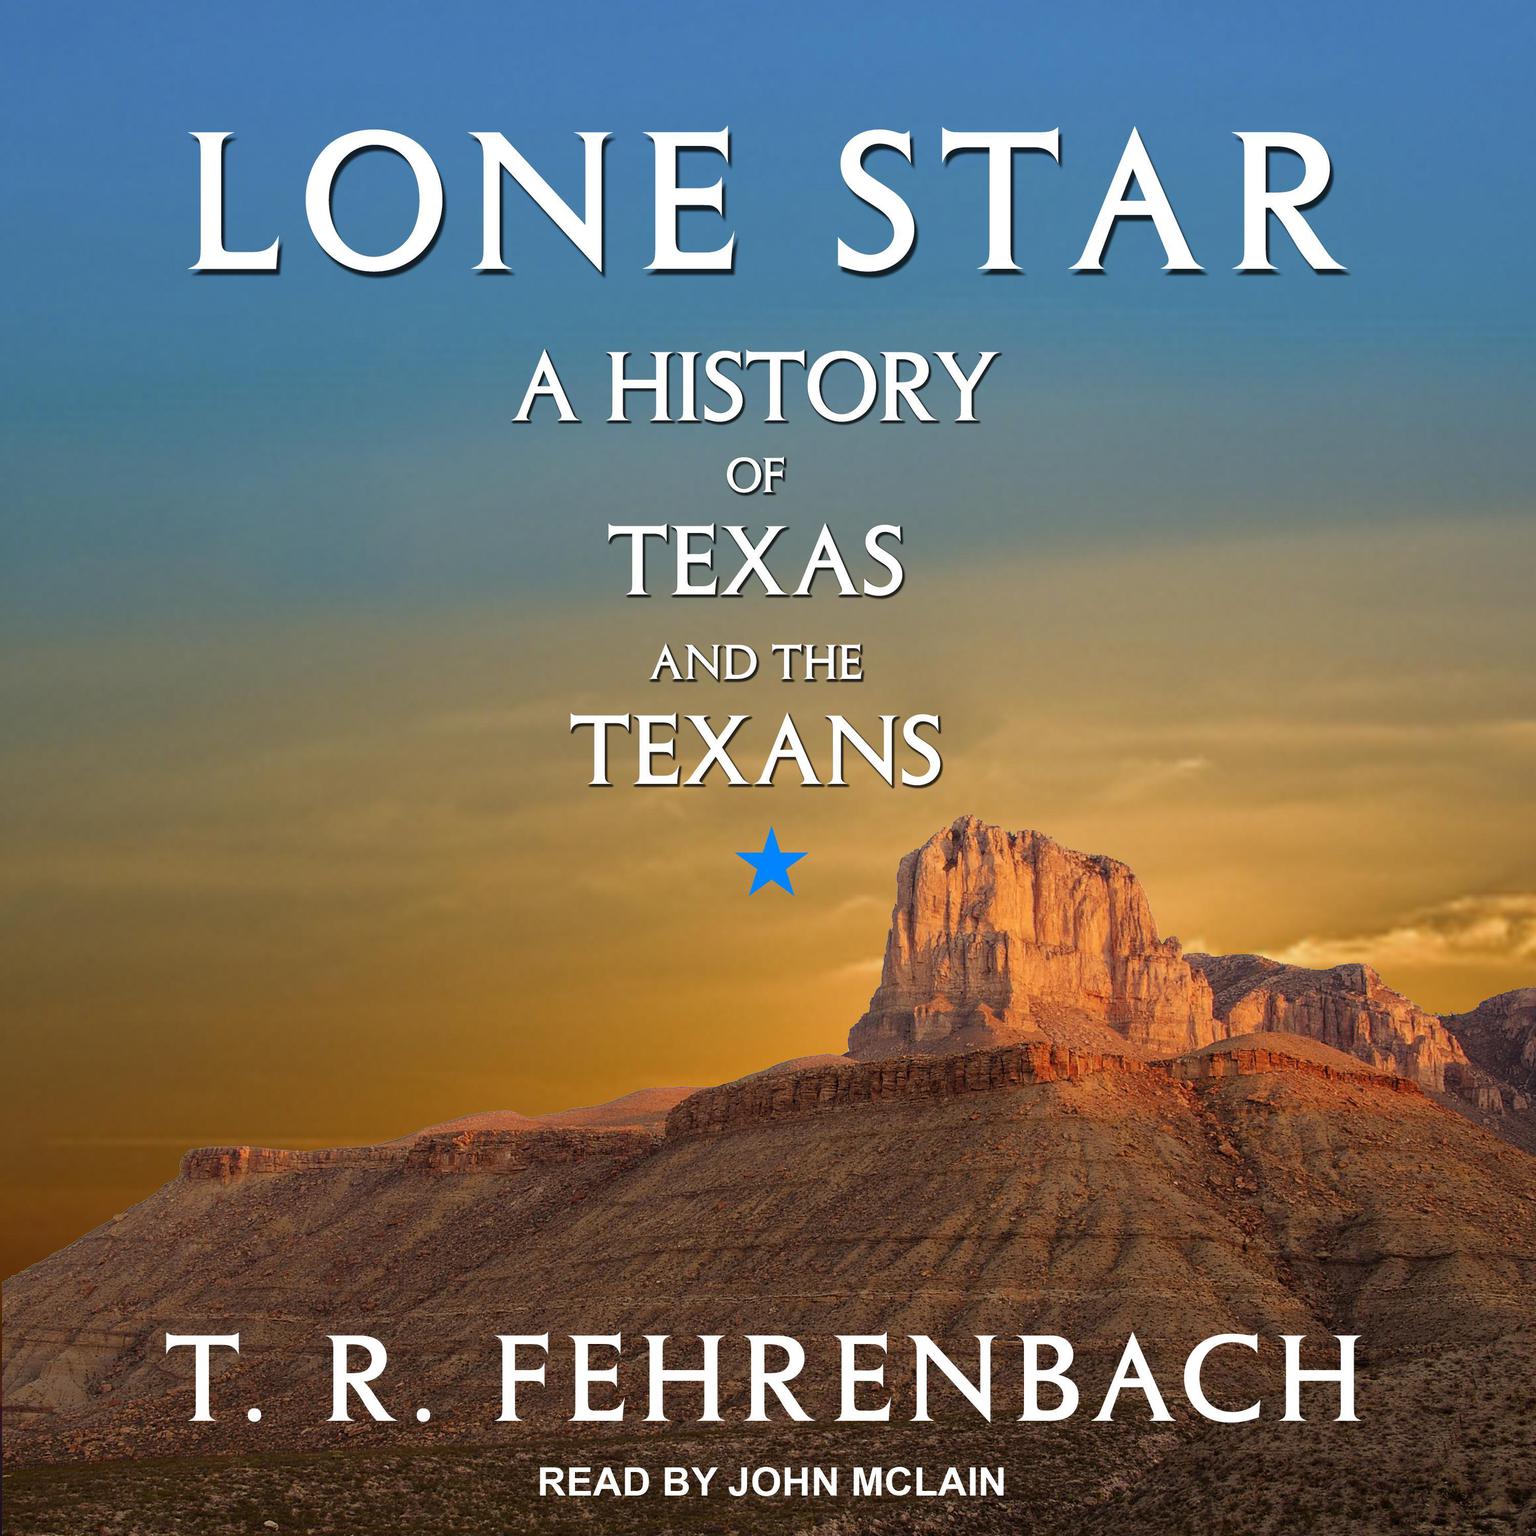 Lone Star: A History Of Texas And The Texans Audiobook, by T. R. Fehrenbach